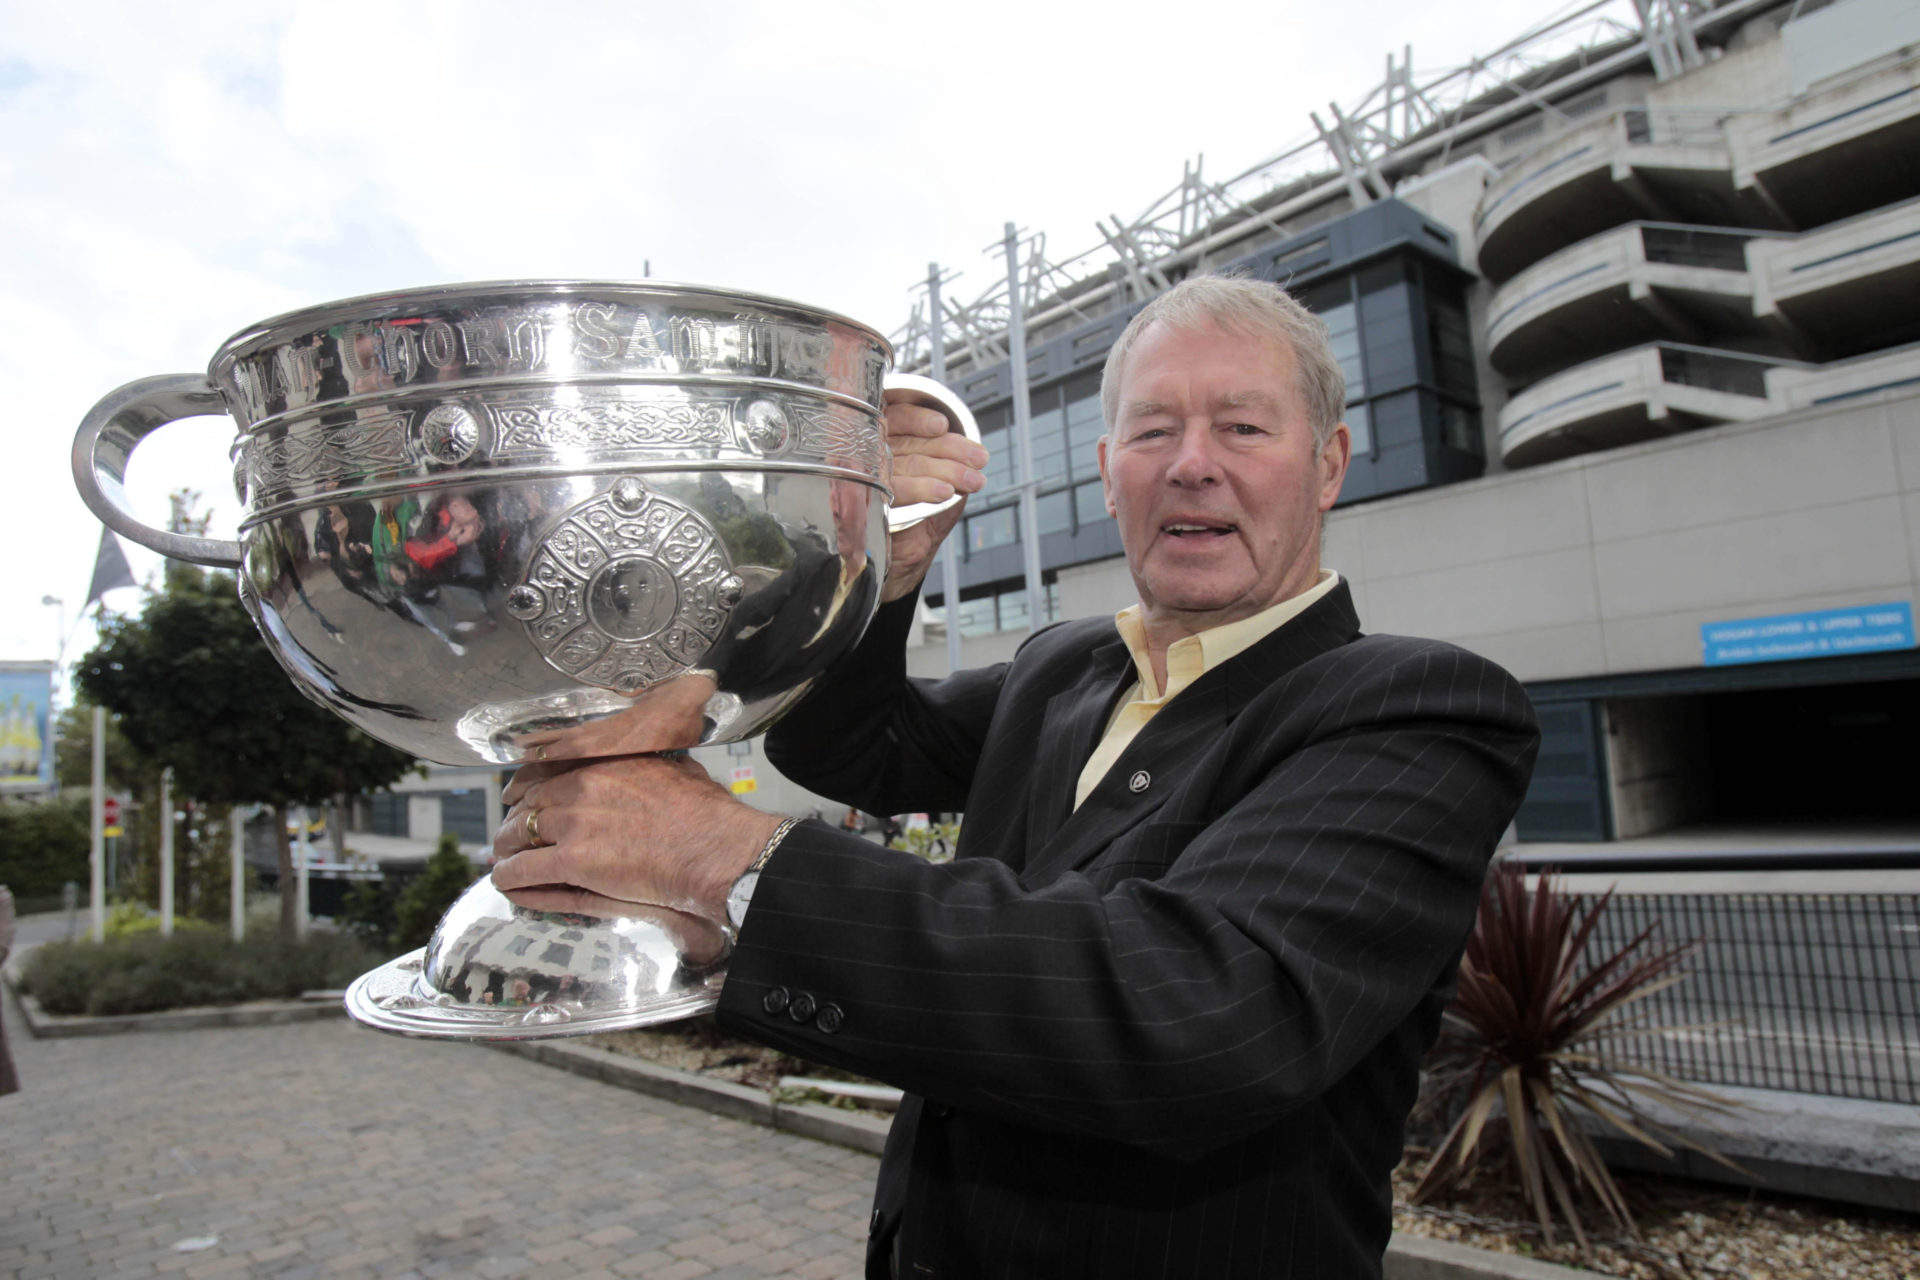 Legendary GAA commentator Mícheál Ó Muircheartaigh holds the Sam Maguire Cup outside Croke Park in Dublin after announcing his retirement in 2010